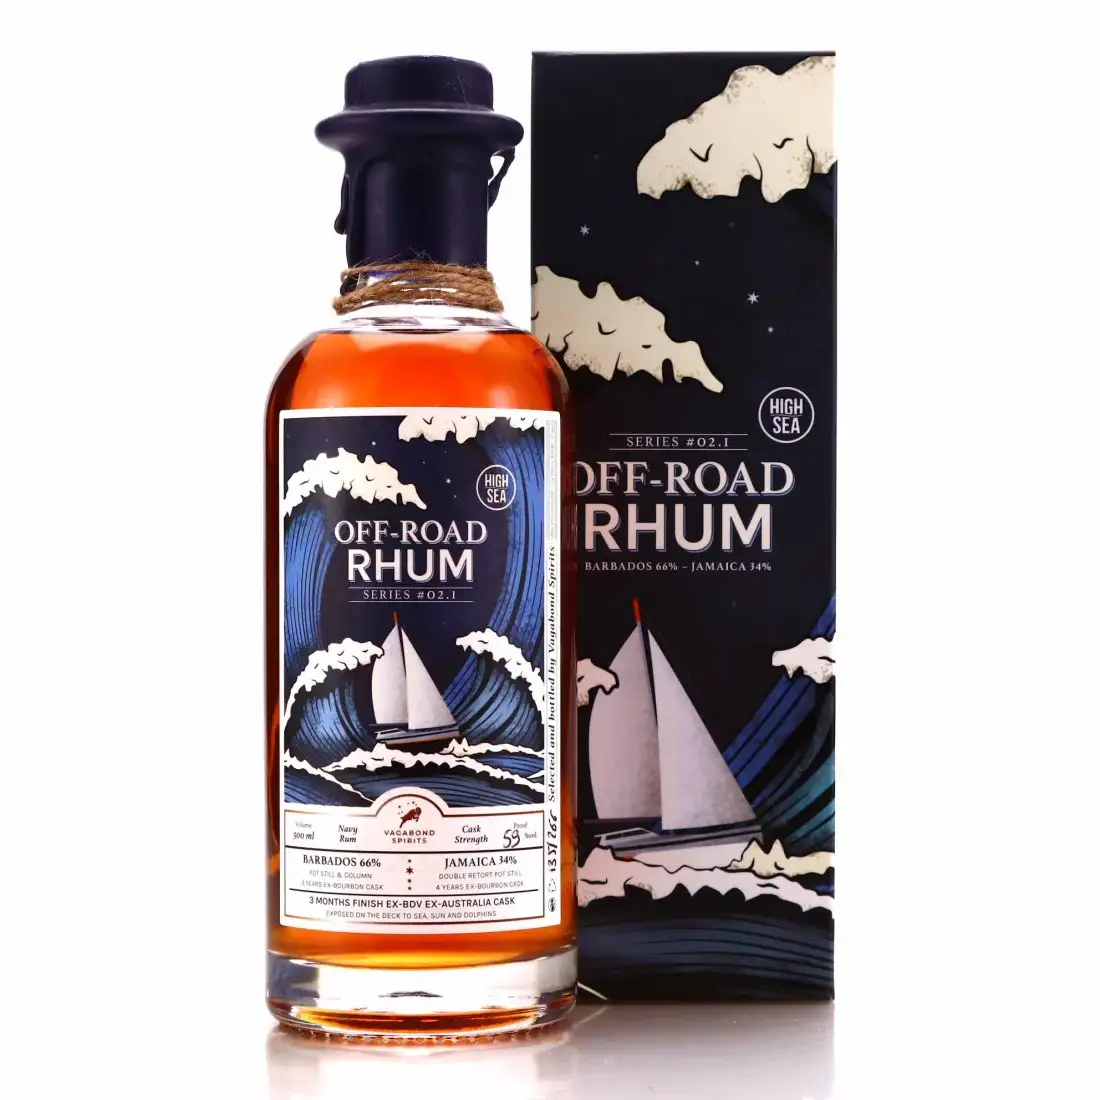 Image of the front of the bottle of the rum Off-Road Rhum Series #02.1